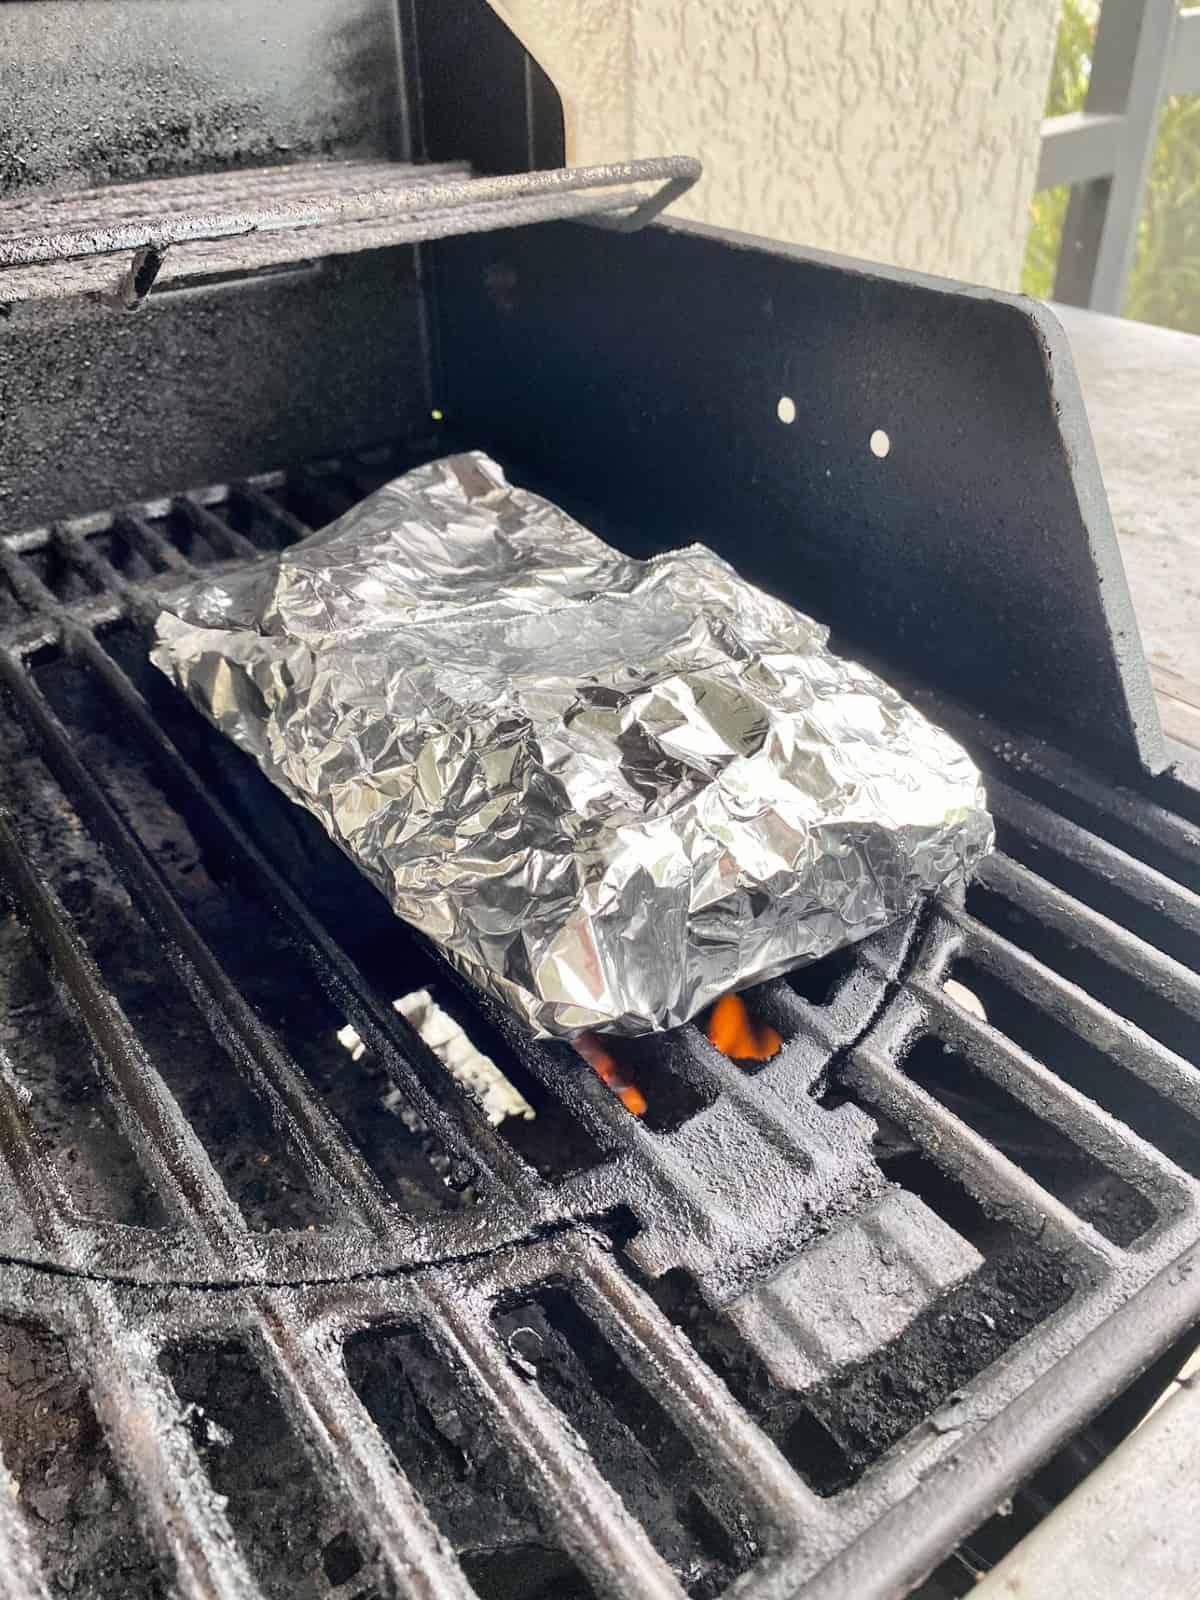 Aluminum foil pouch on a hot gas grill with flames underneath it.